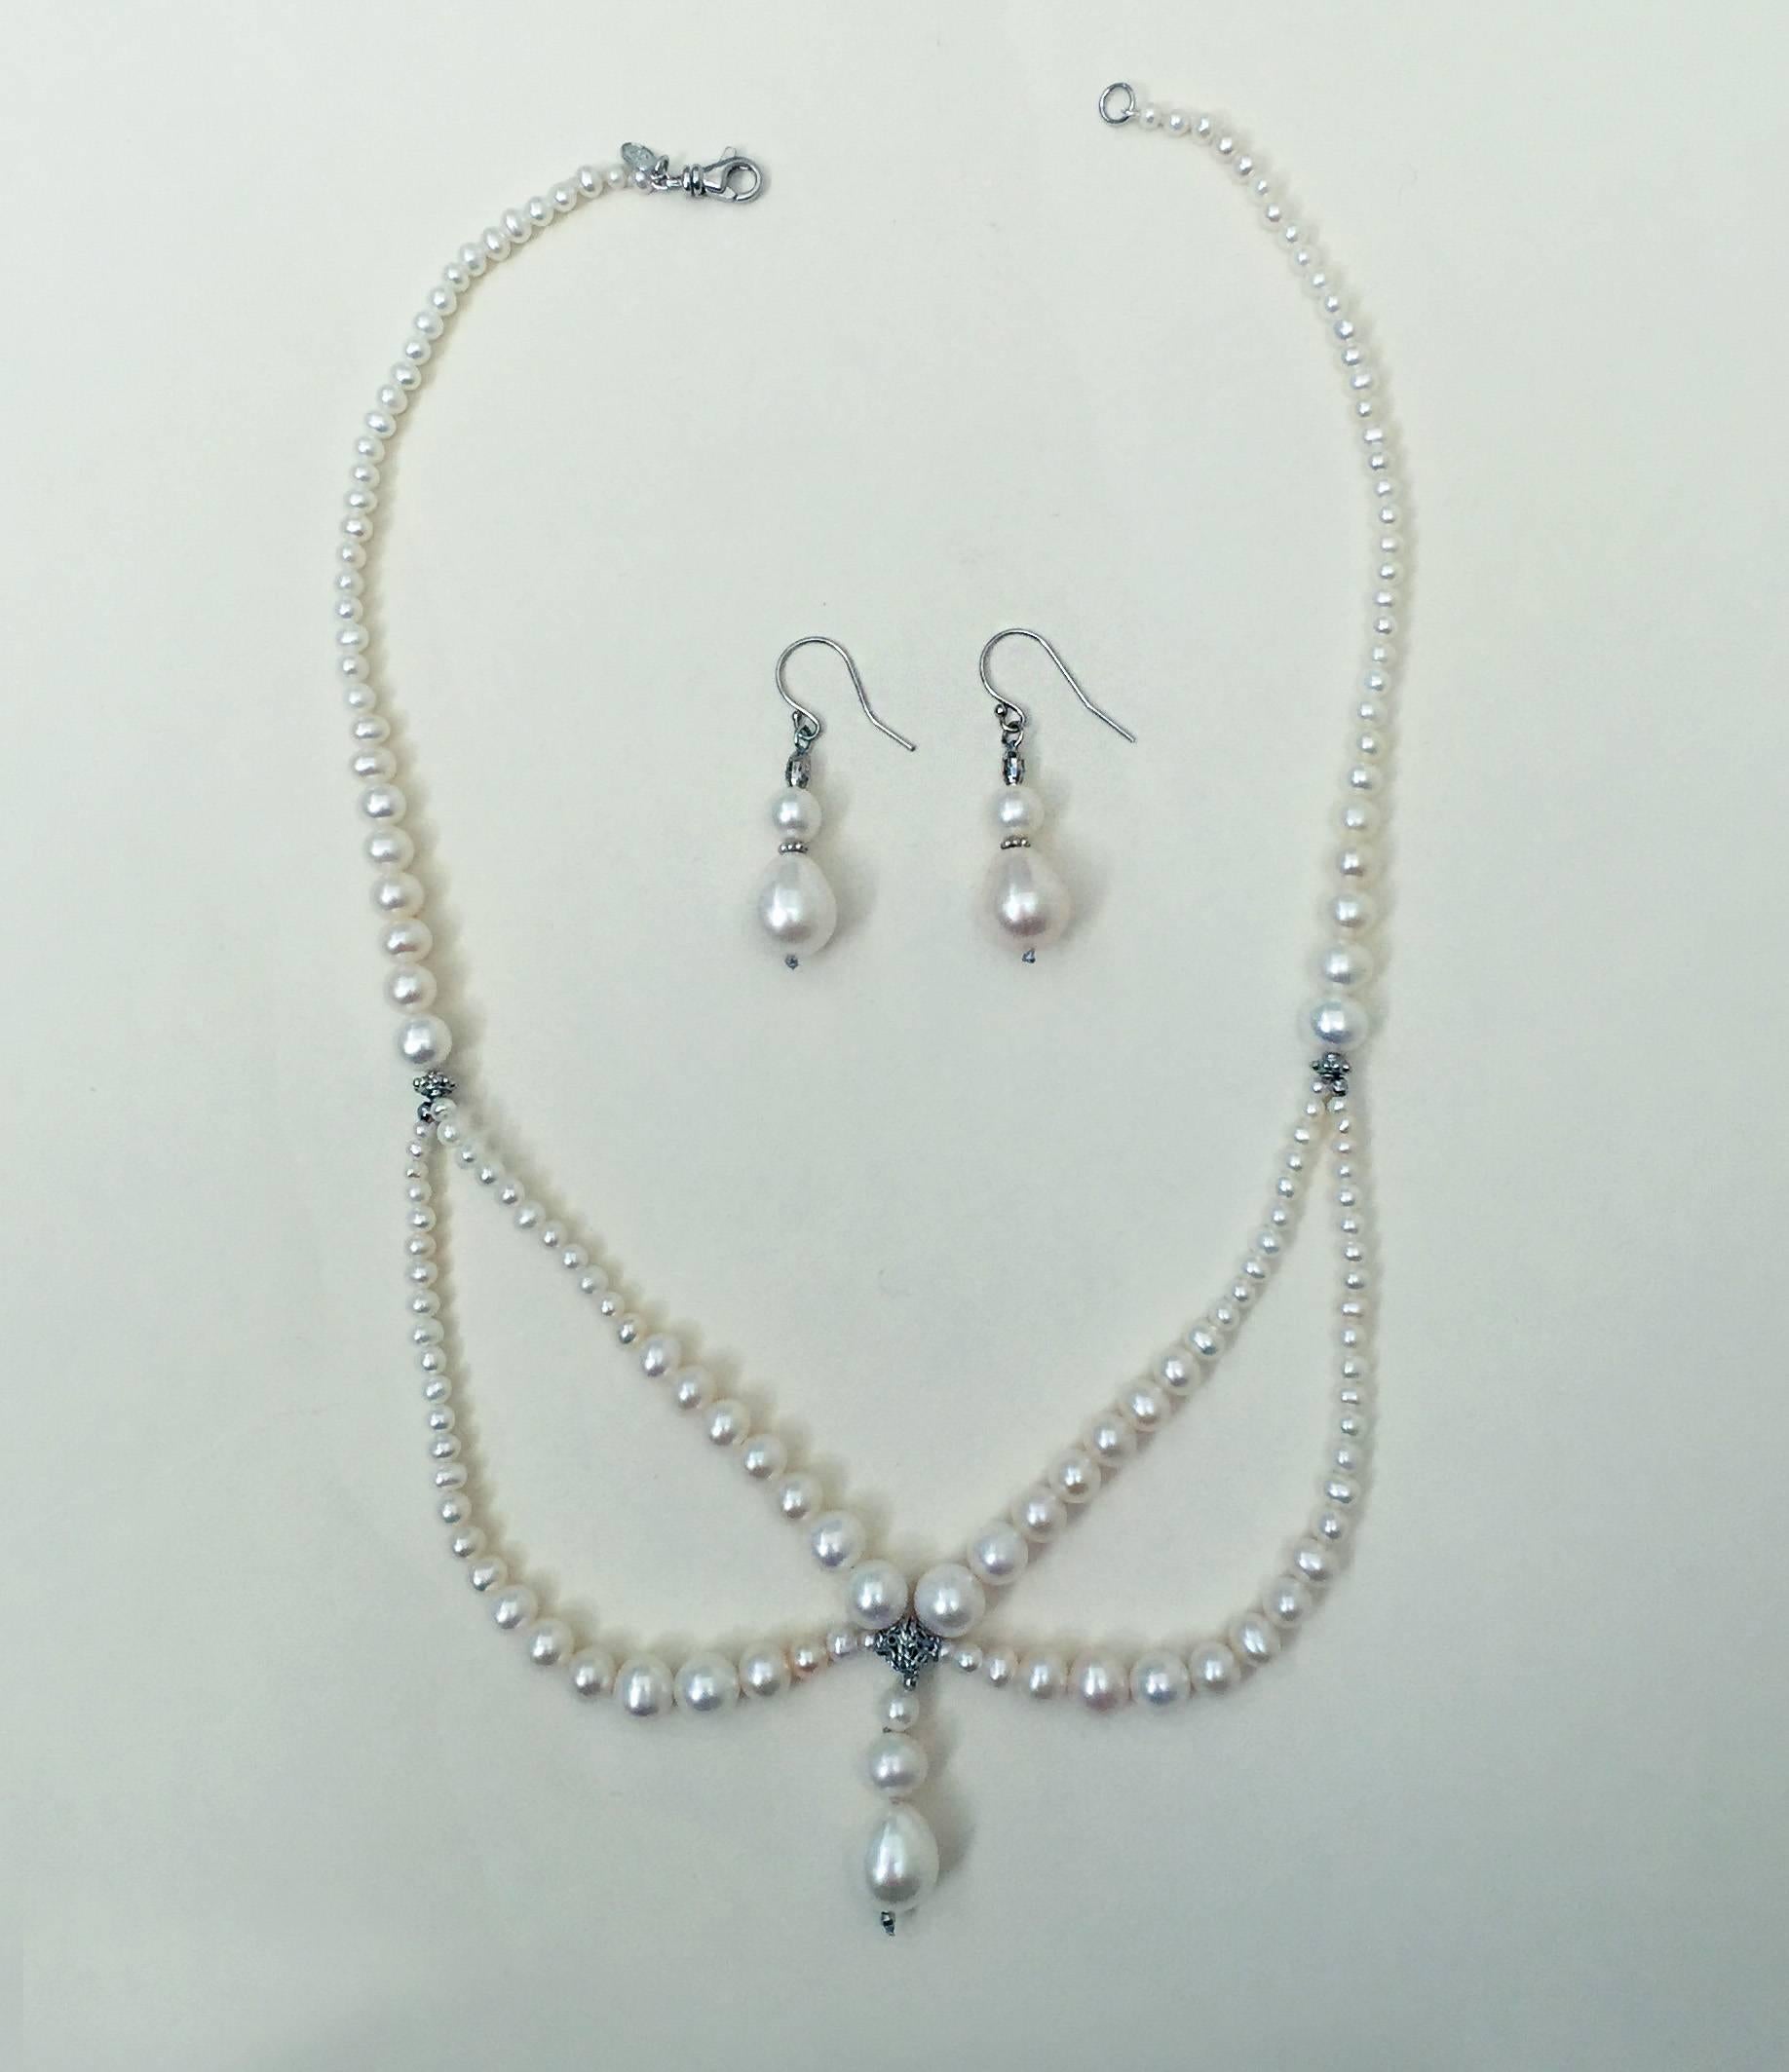 Graduated Pearl Draped Necklace 14 Karat White Golds Beads and Clasp by Marina J 1